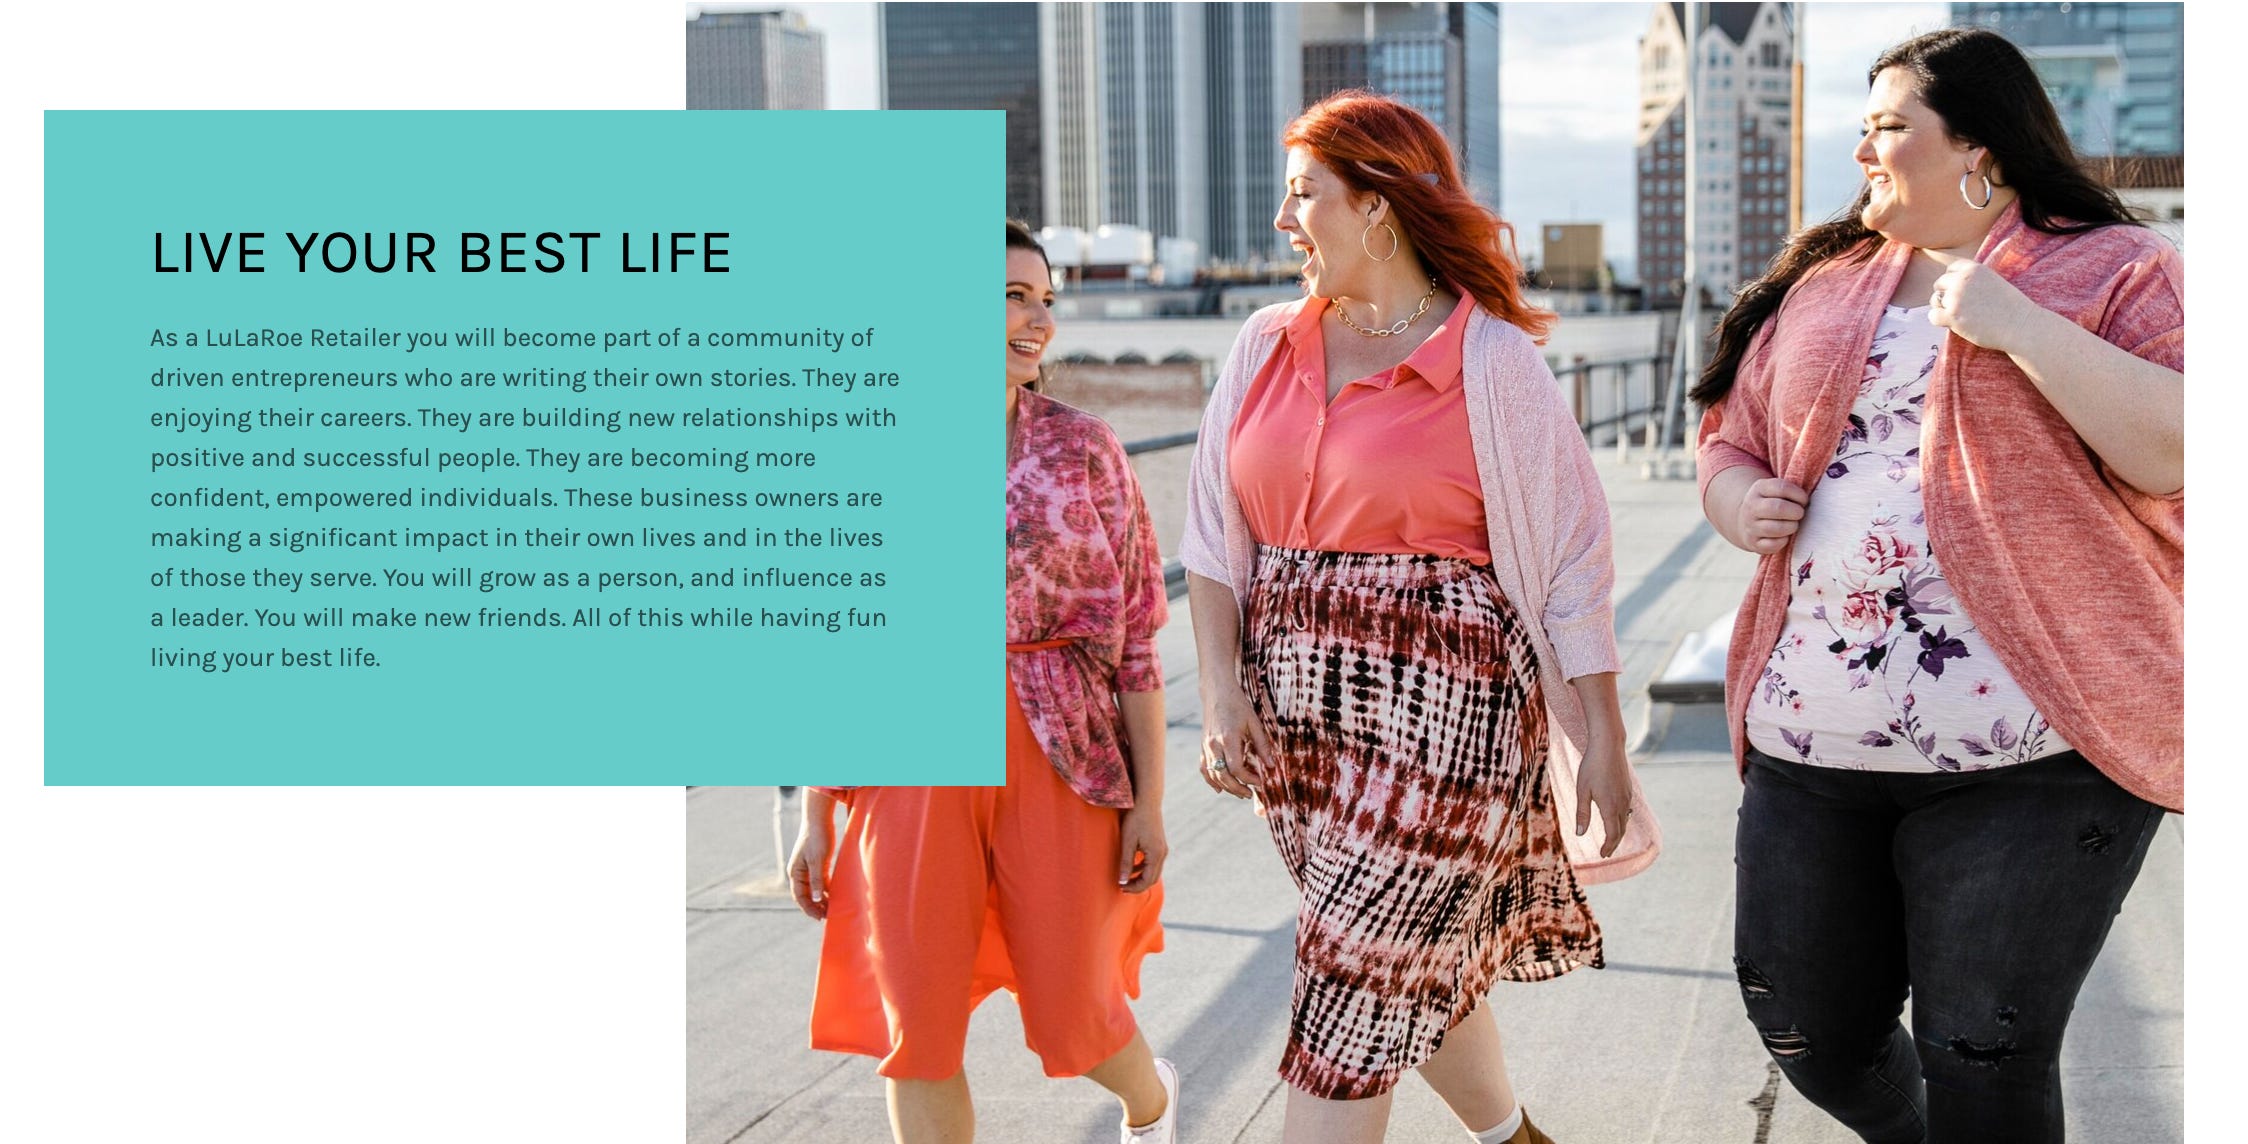 LuLaRoe Scam Review: A Bad “Business” for Women – Pink Truth